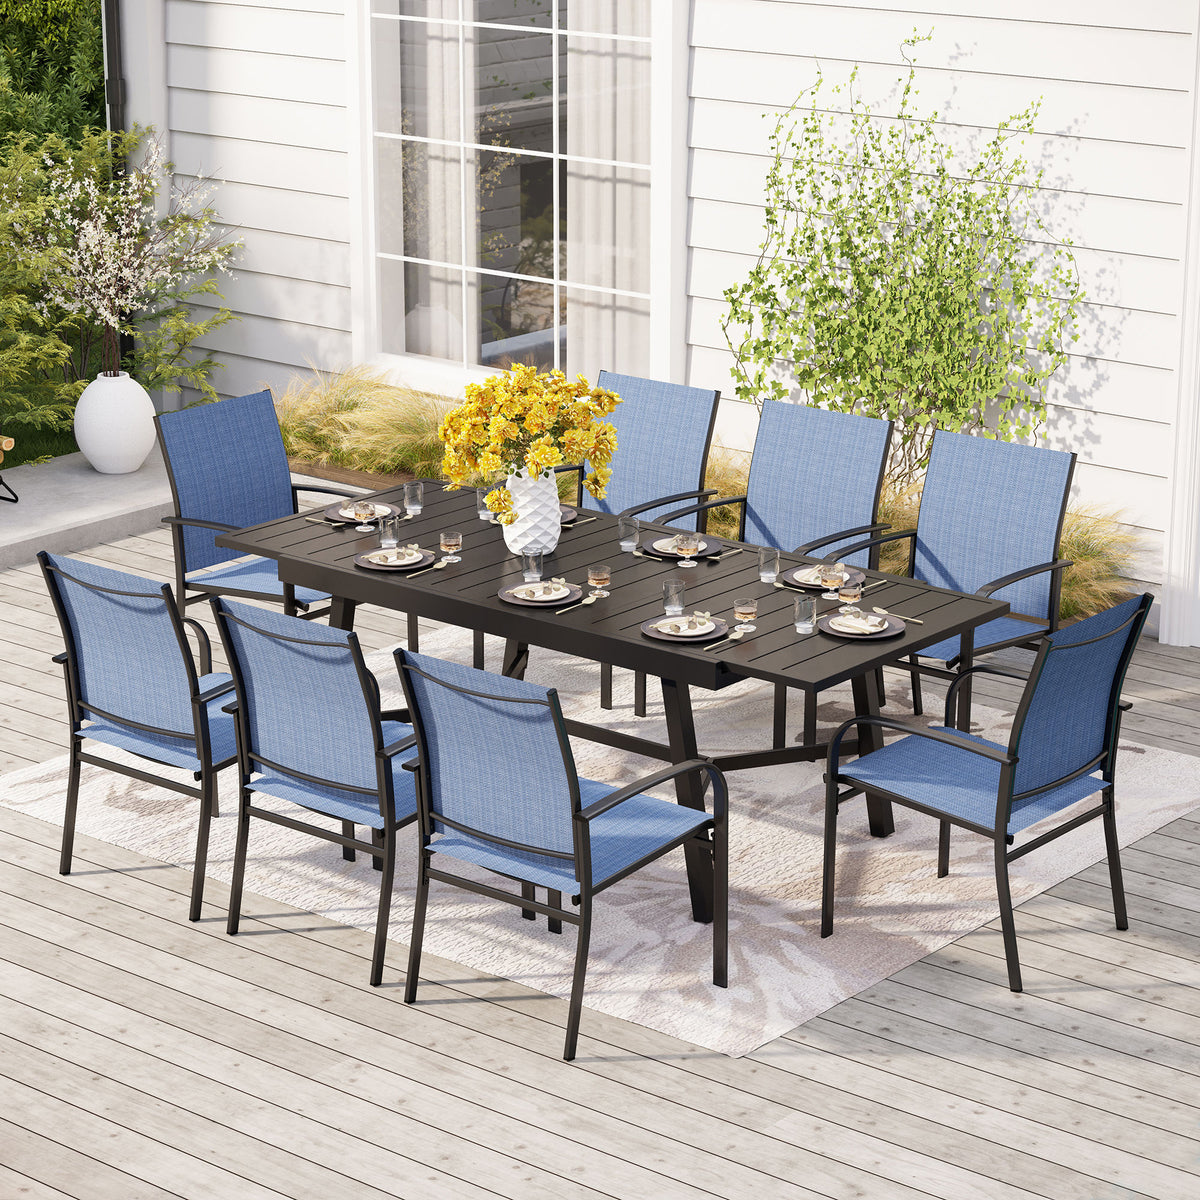 Sophia & William 9/7-Piece Patio Dining Set Reinforced Extendable Table & Textilene Fixed Chairs